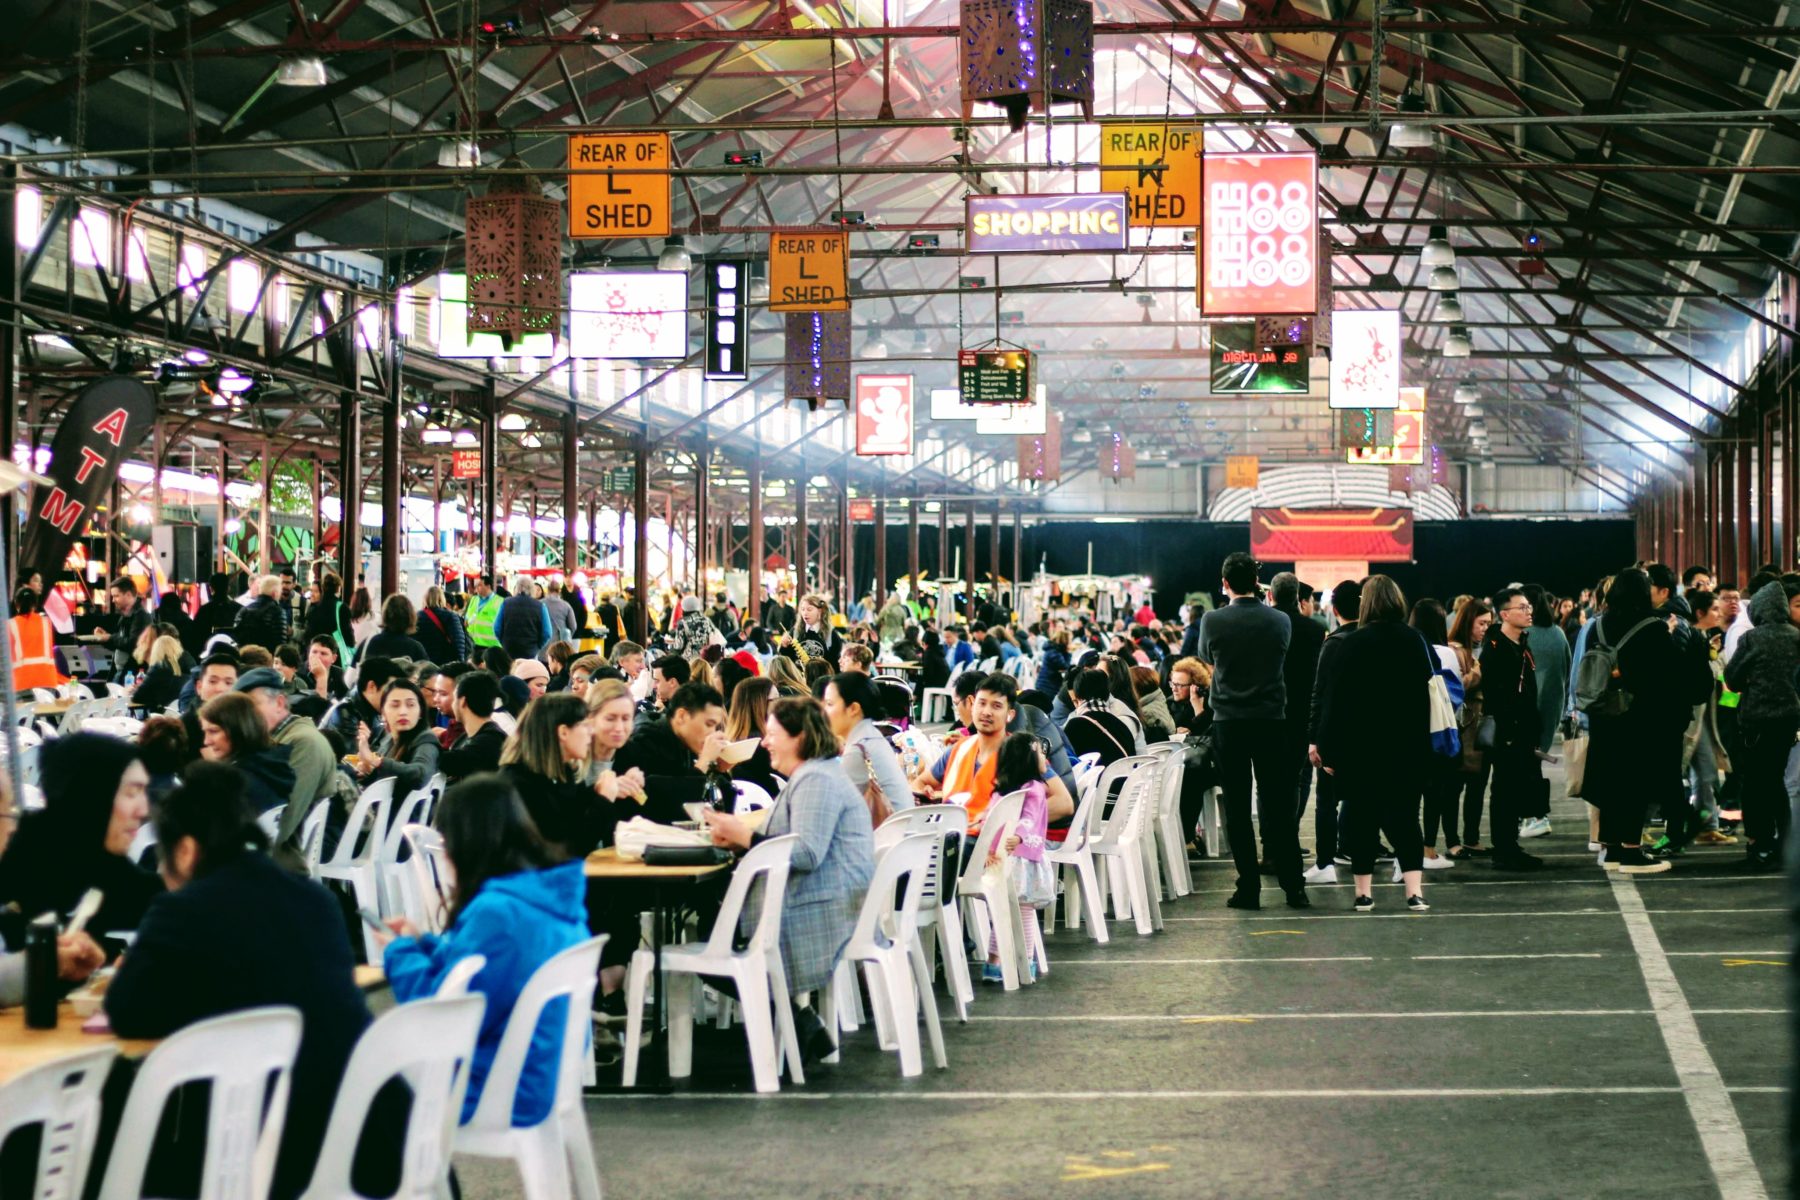 A group of people eating at Melbourne's Vic Market.